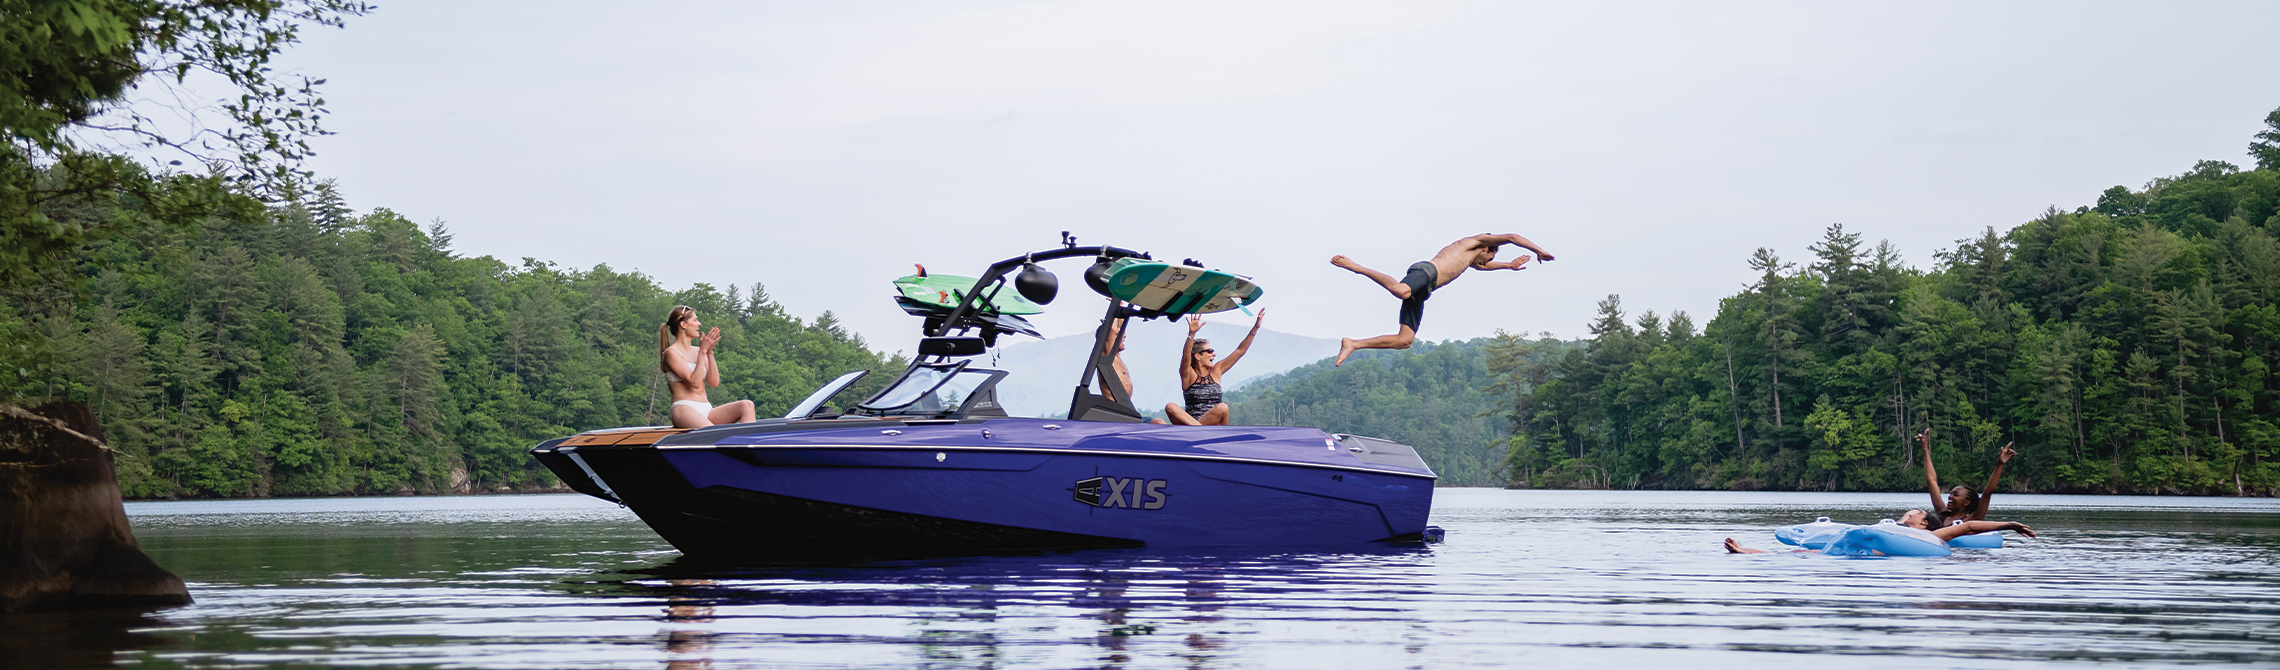 Four people enjoying the lake on an Axis Wake Research® boat